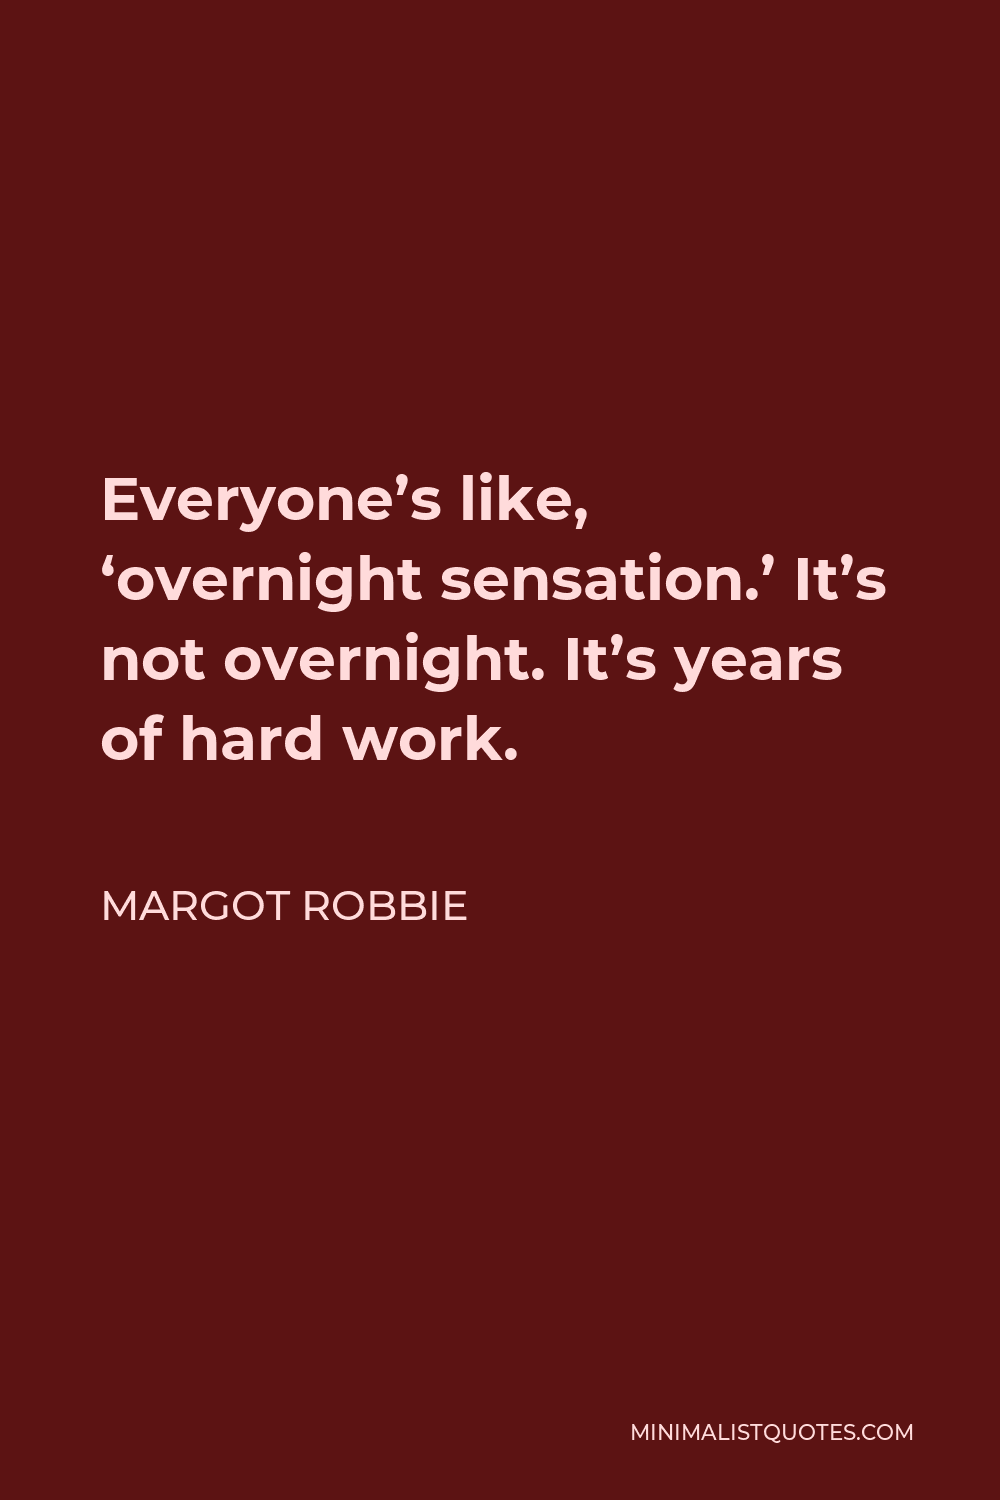 Margot Robbie Quote - Everyone’s like, ‘overnight sensation.’ It’s not overnight. It’s years of hard work.